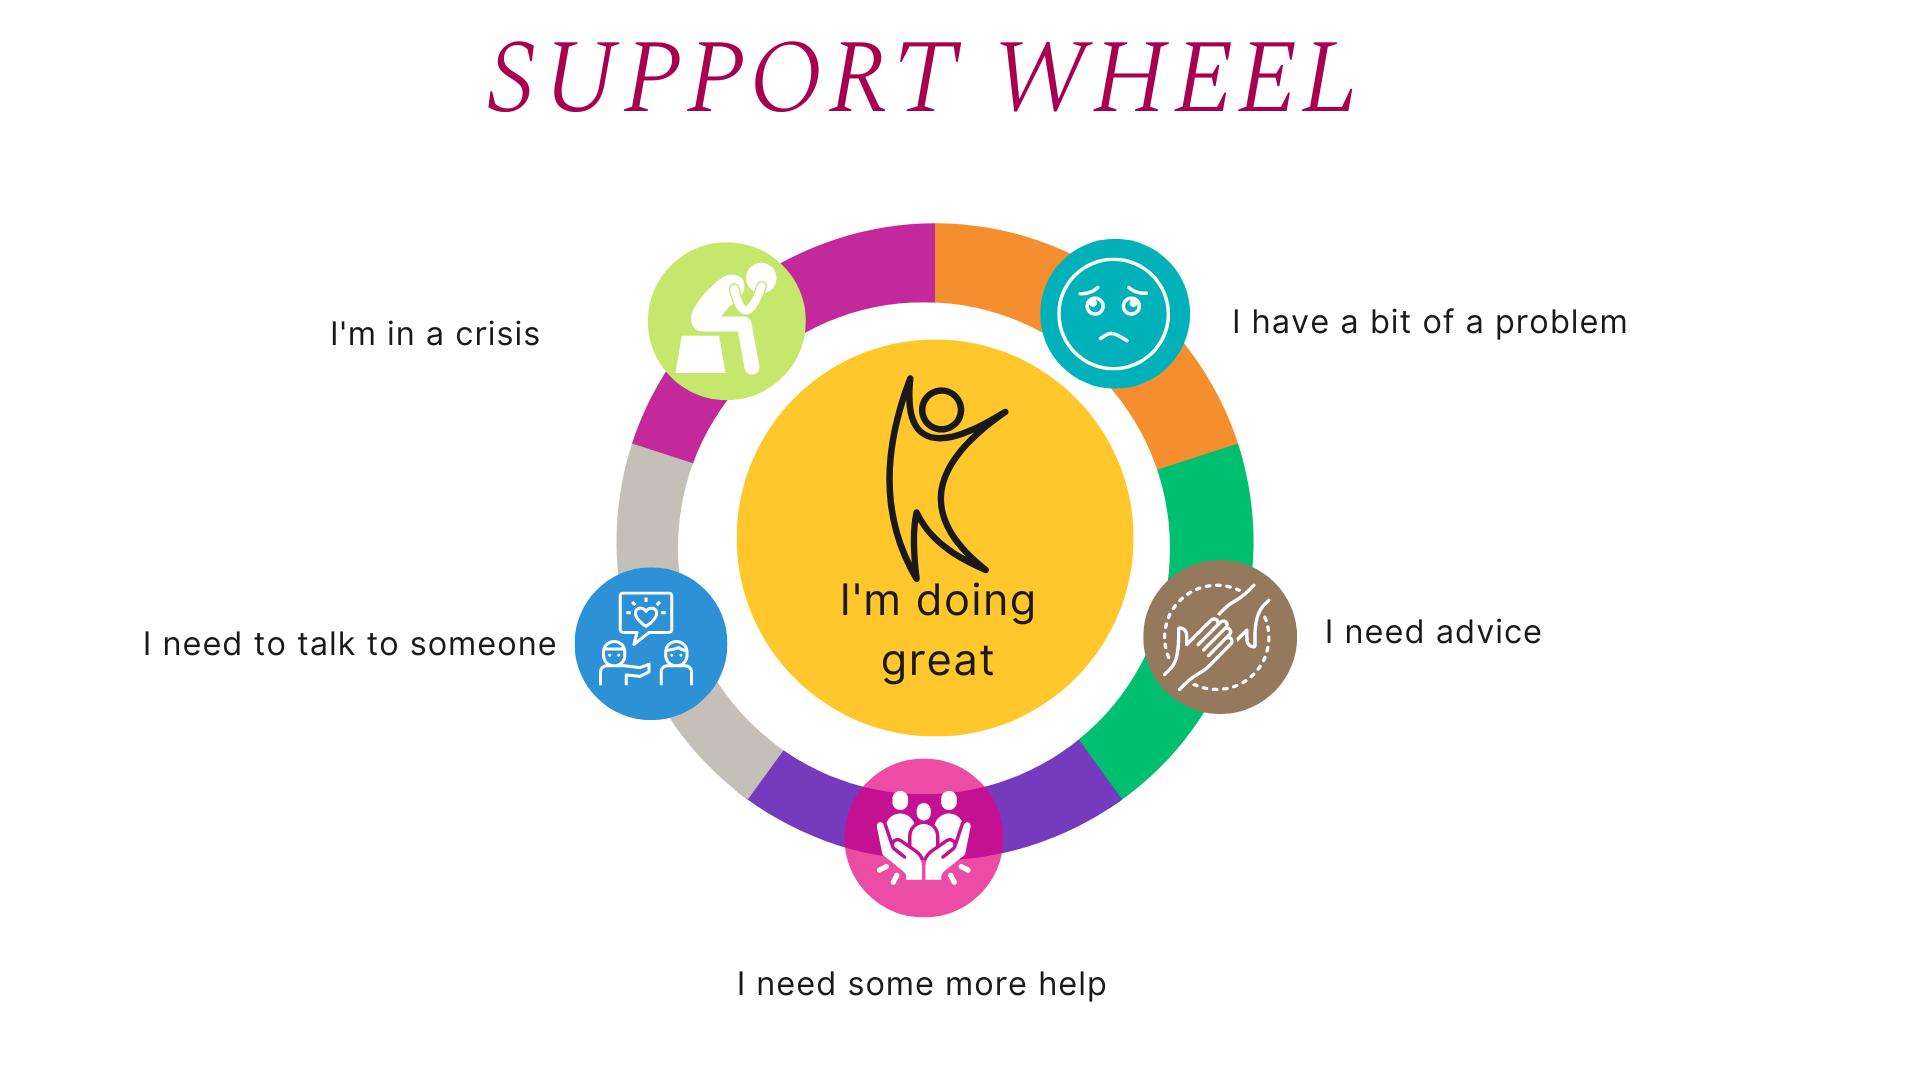 Updated image of Support Wheel